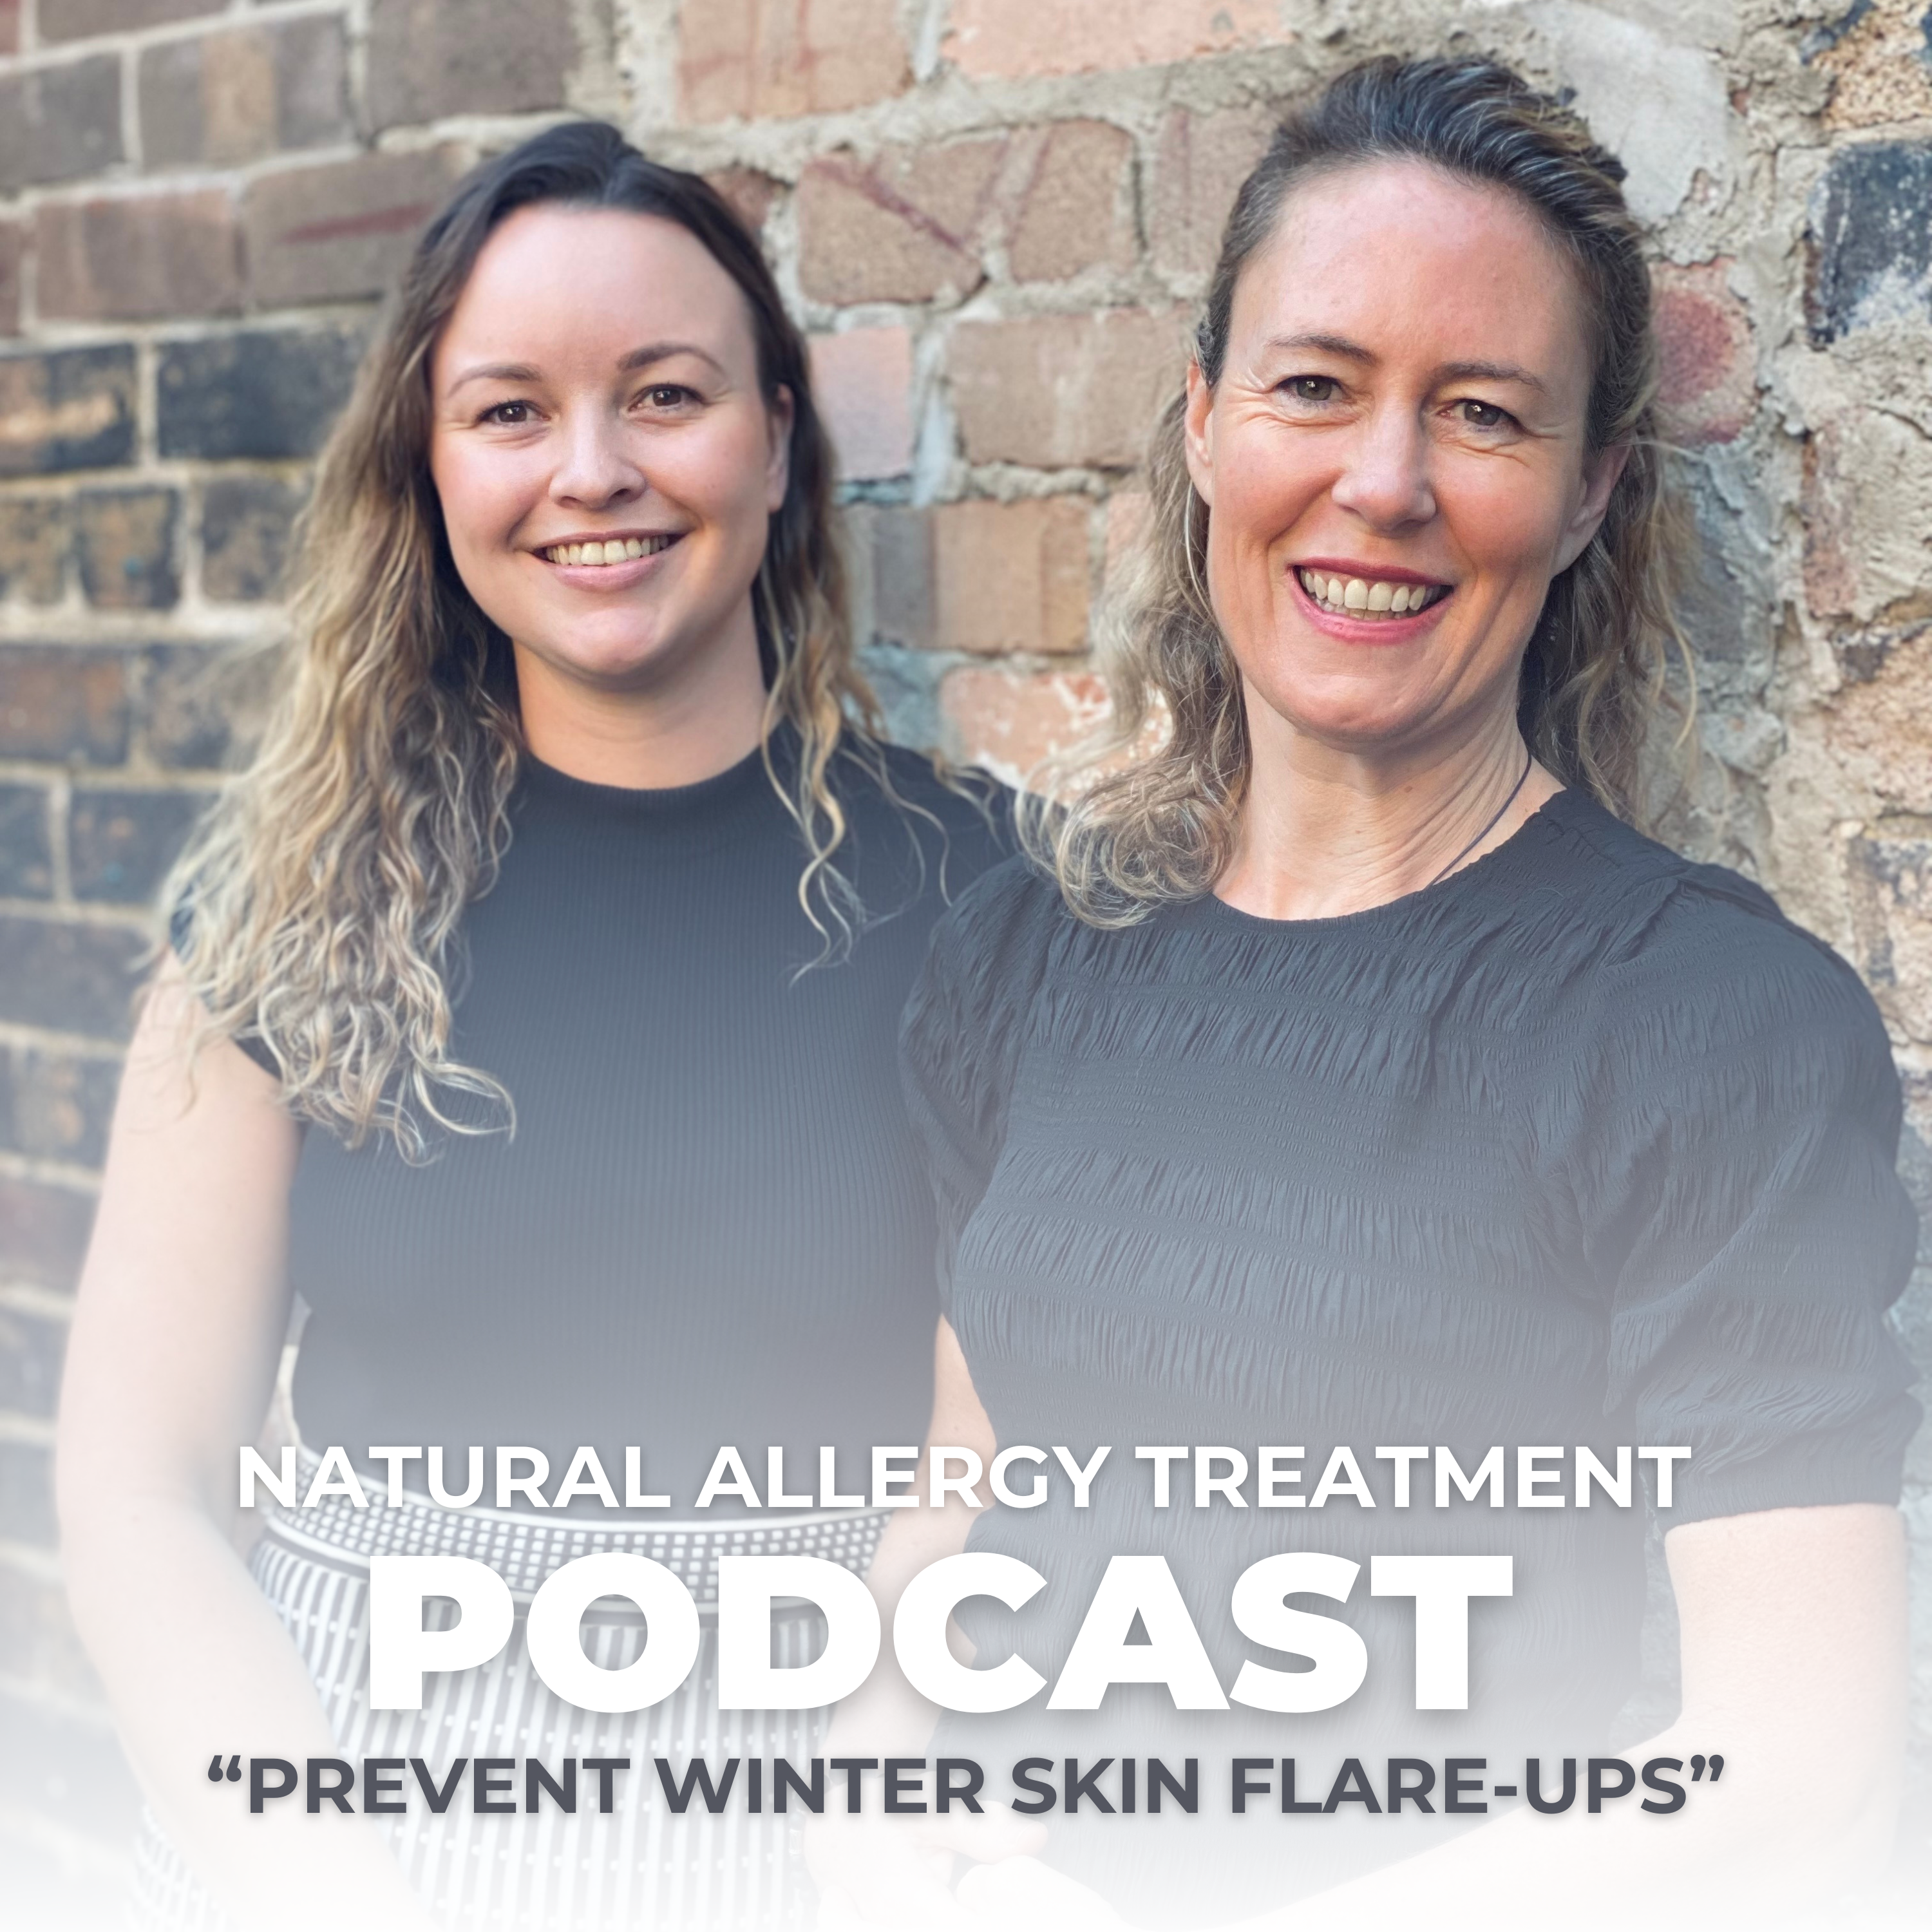 How to prevent eczema flare ups in winter